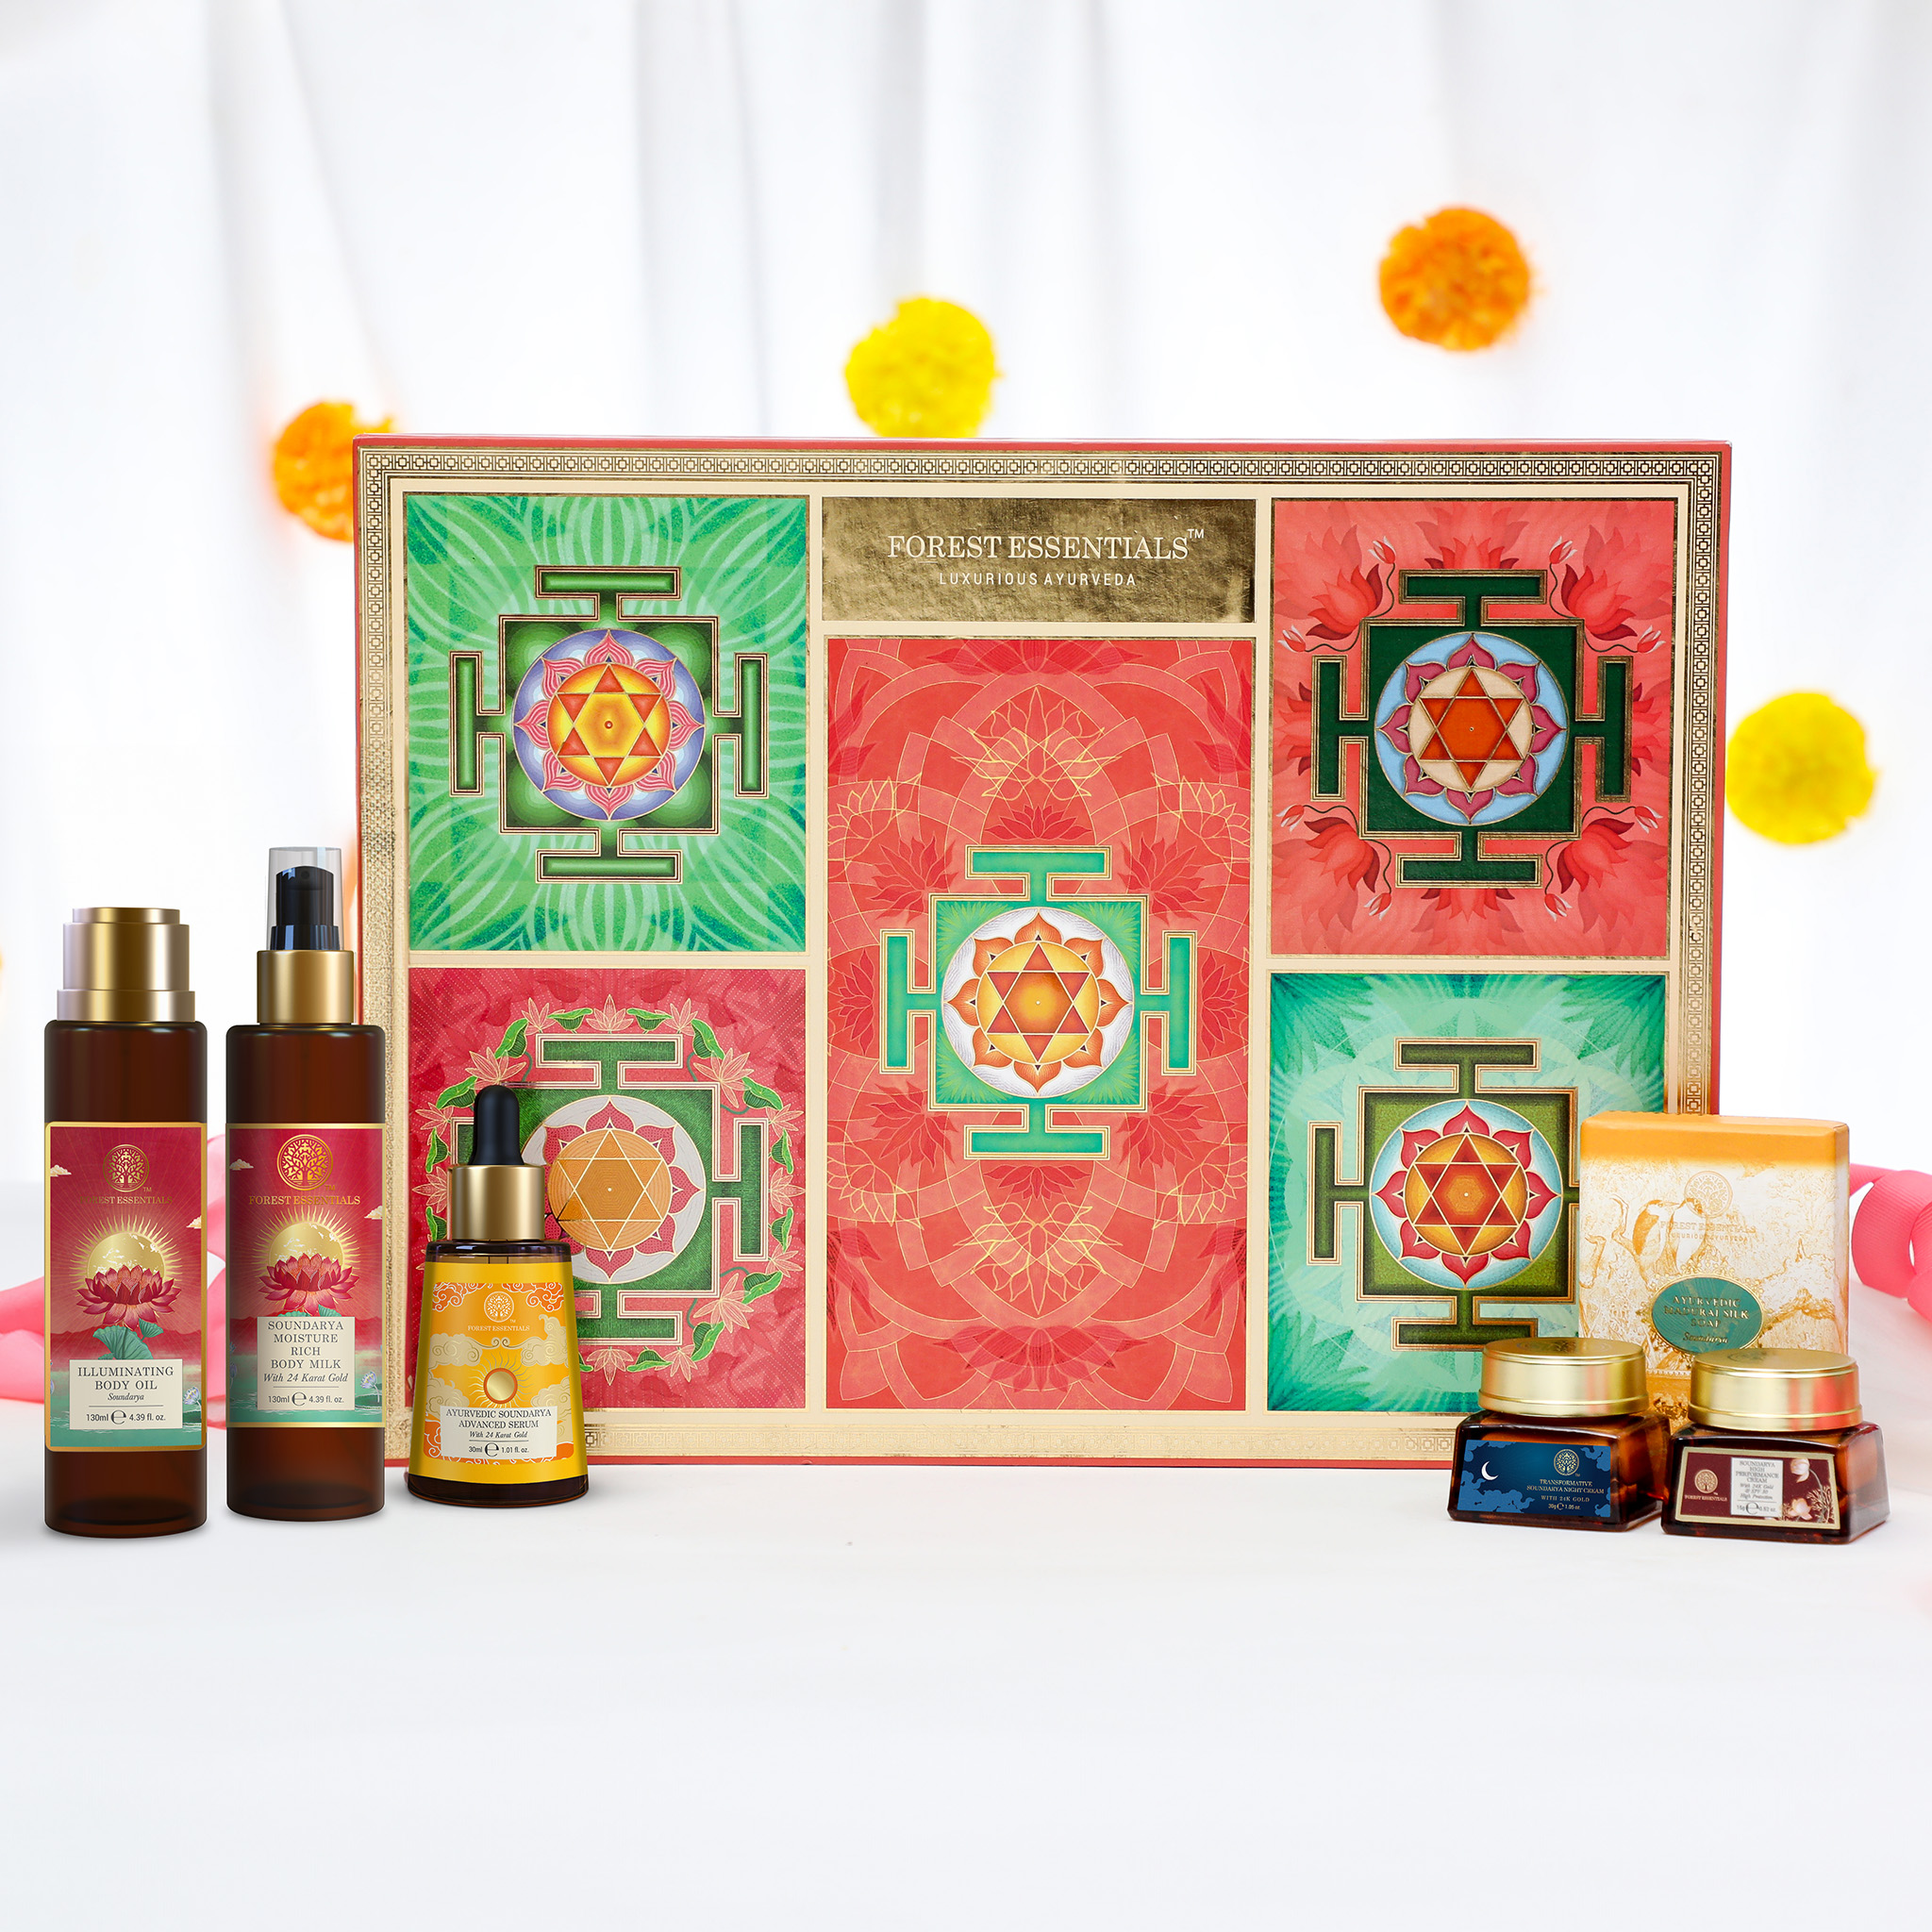 Buy Forest Essentials Forest Essentials Van Vatika Gift Box Face- Body and  Hair Care Kit 6 Piece Gift Set at Redfynd